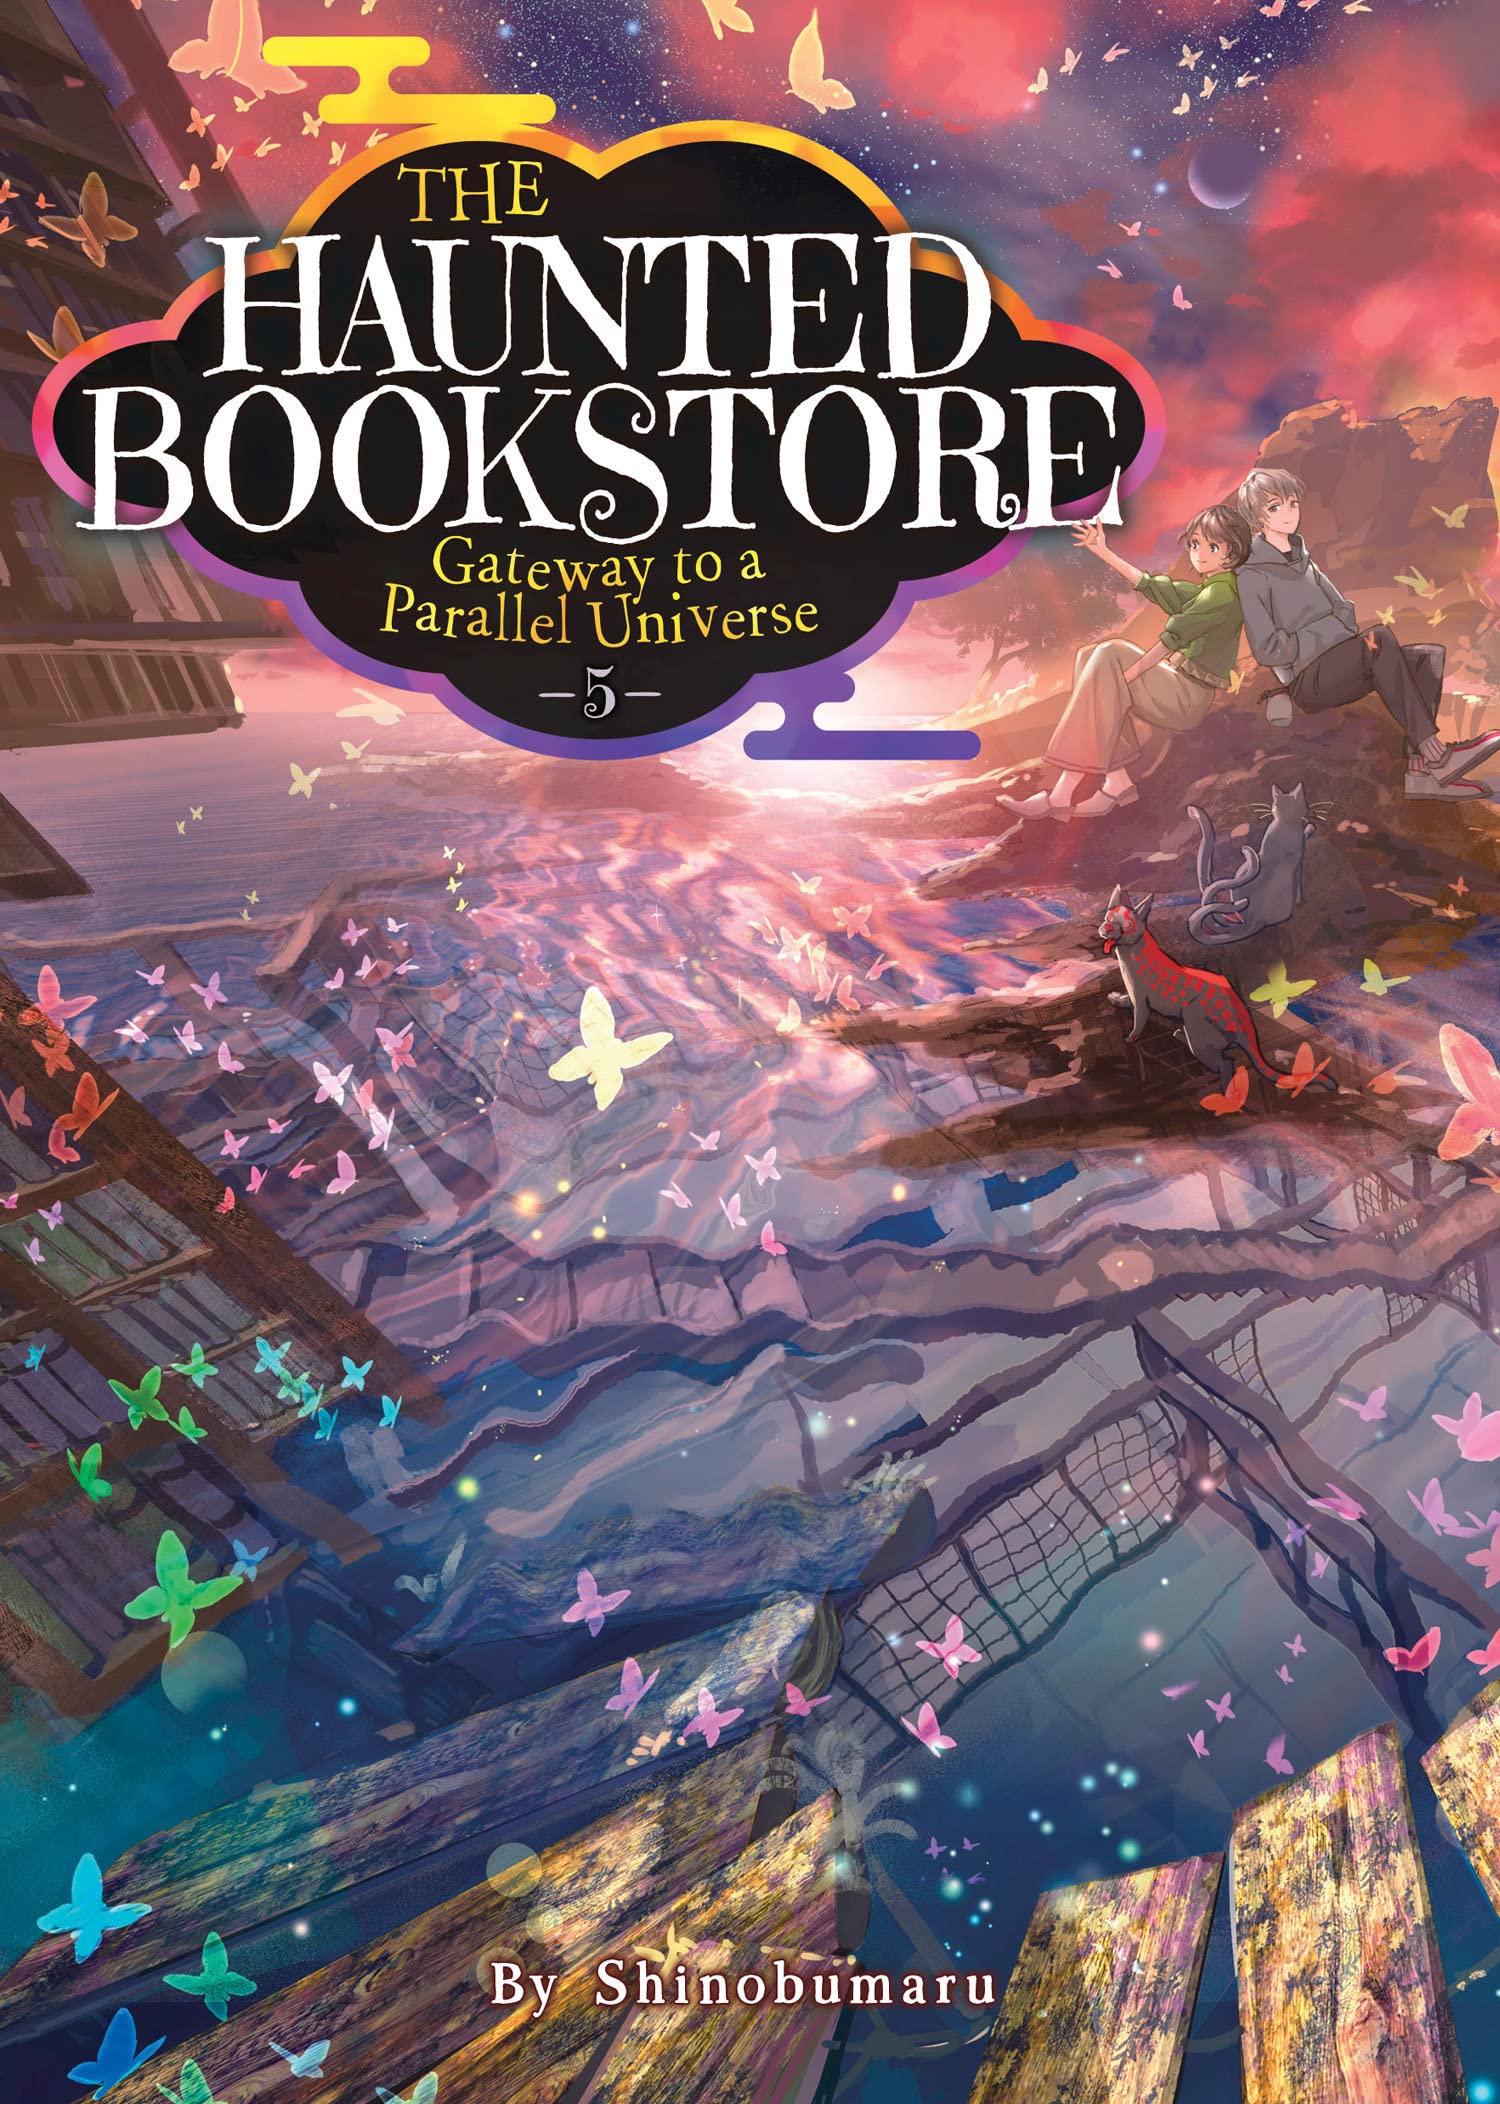 The Haunted Bookstore - Gateway to a Parallel Universe (Light Novel) Vol. 05